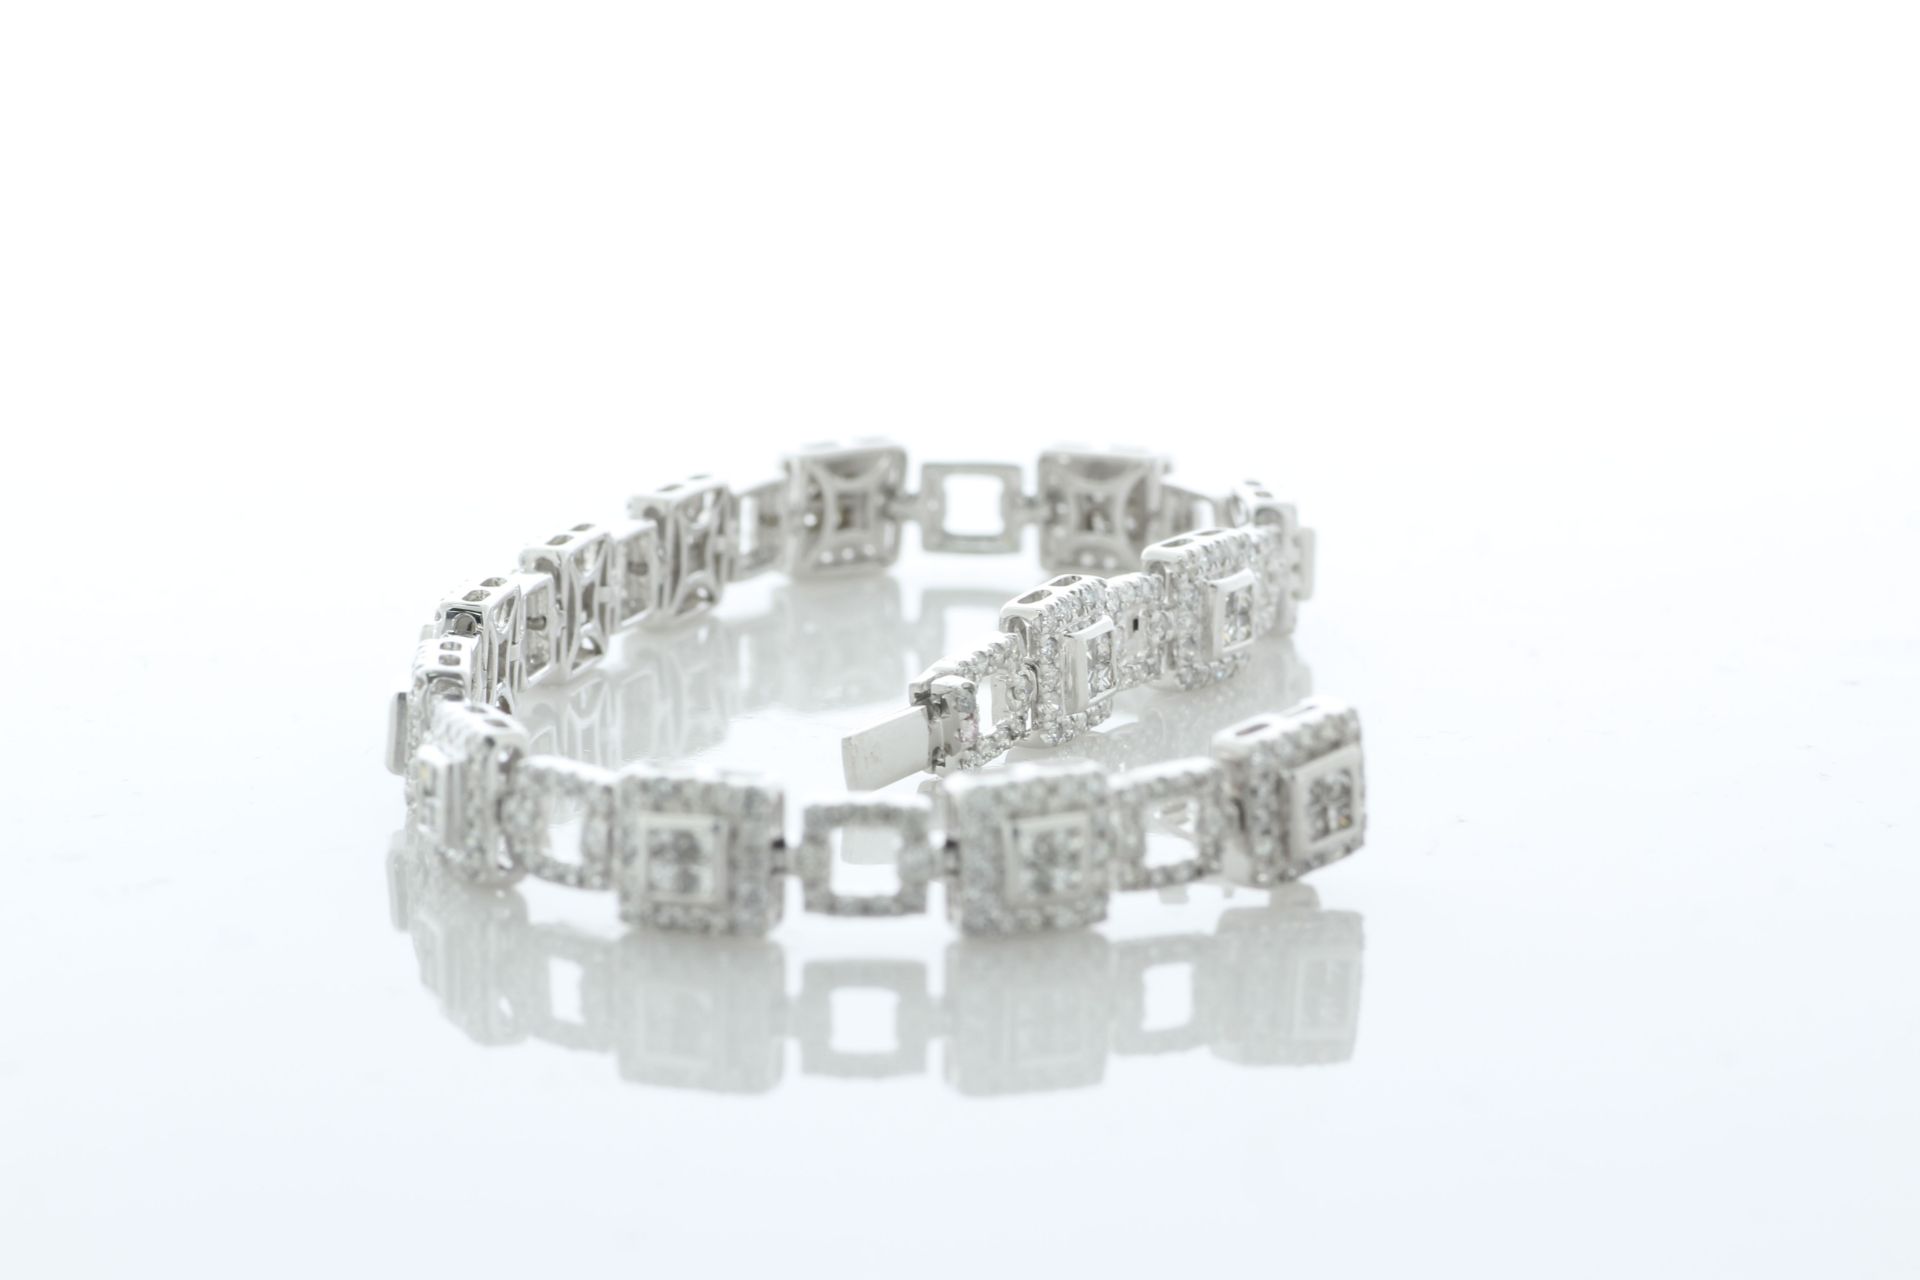 14ct White Gold Full Eternity Diamond Bracelet 3.80 Carats - Valued By IDI £19,850.00 - This - Image 3 of 4